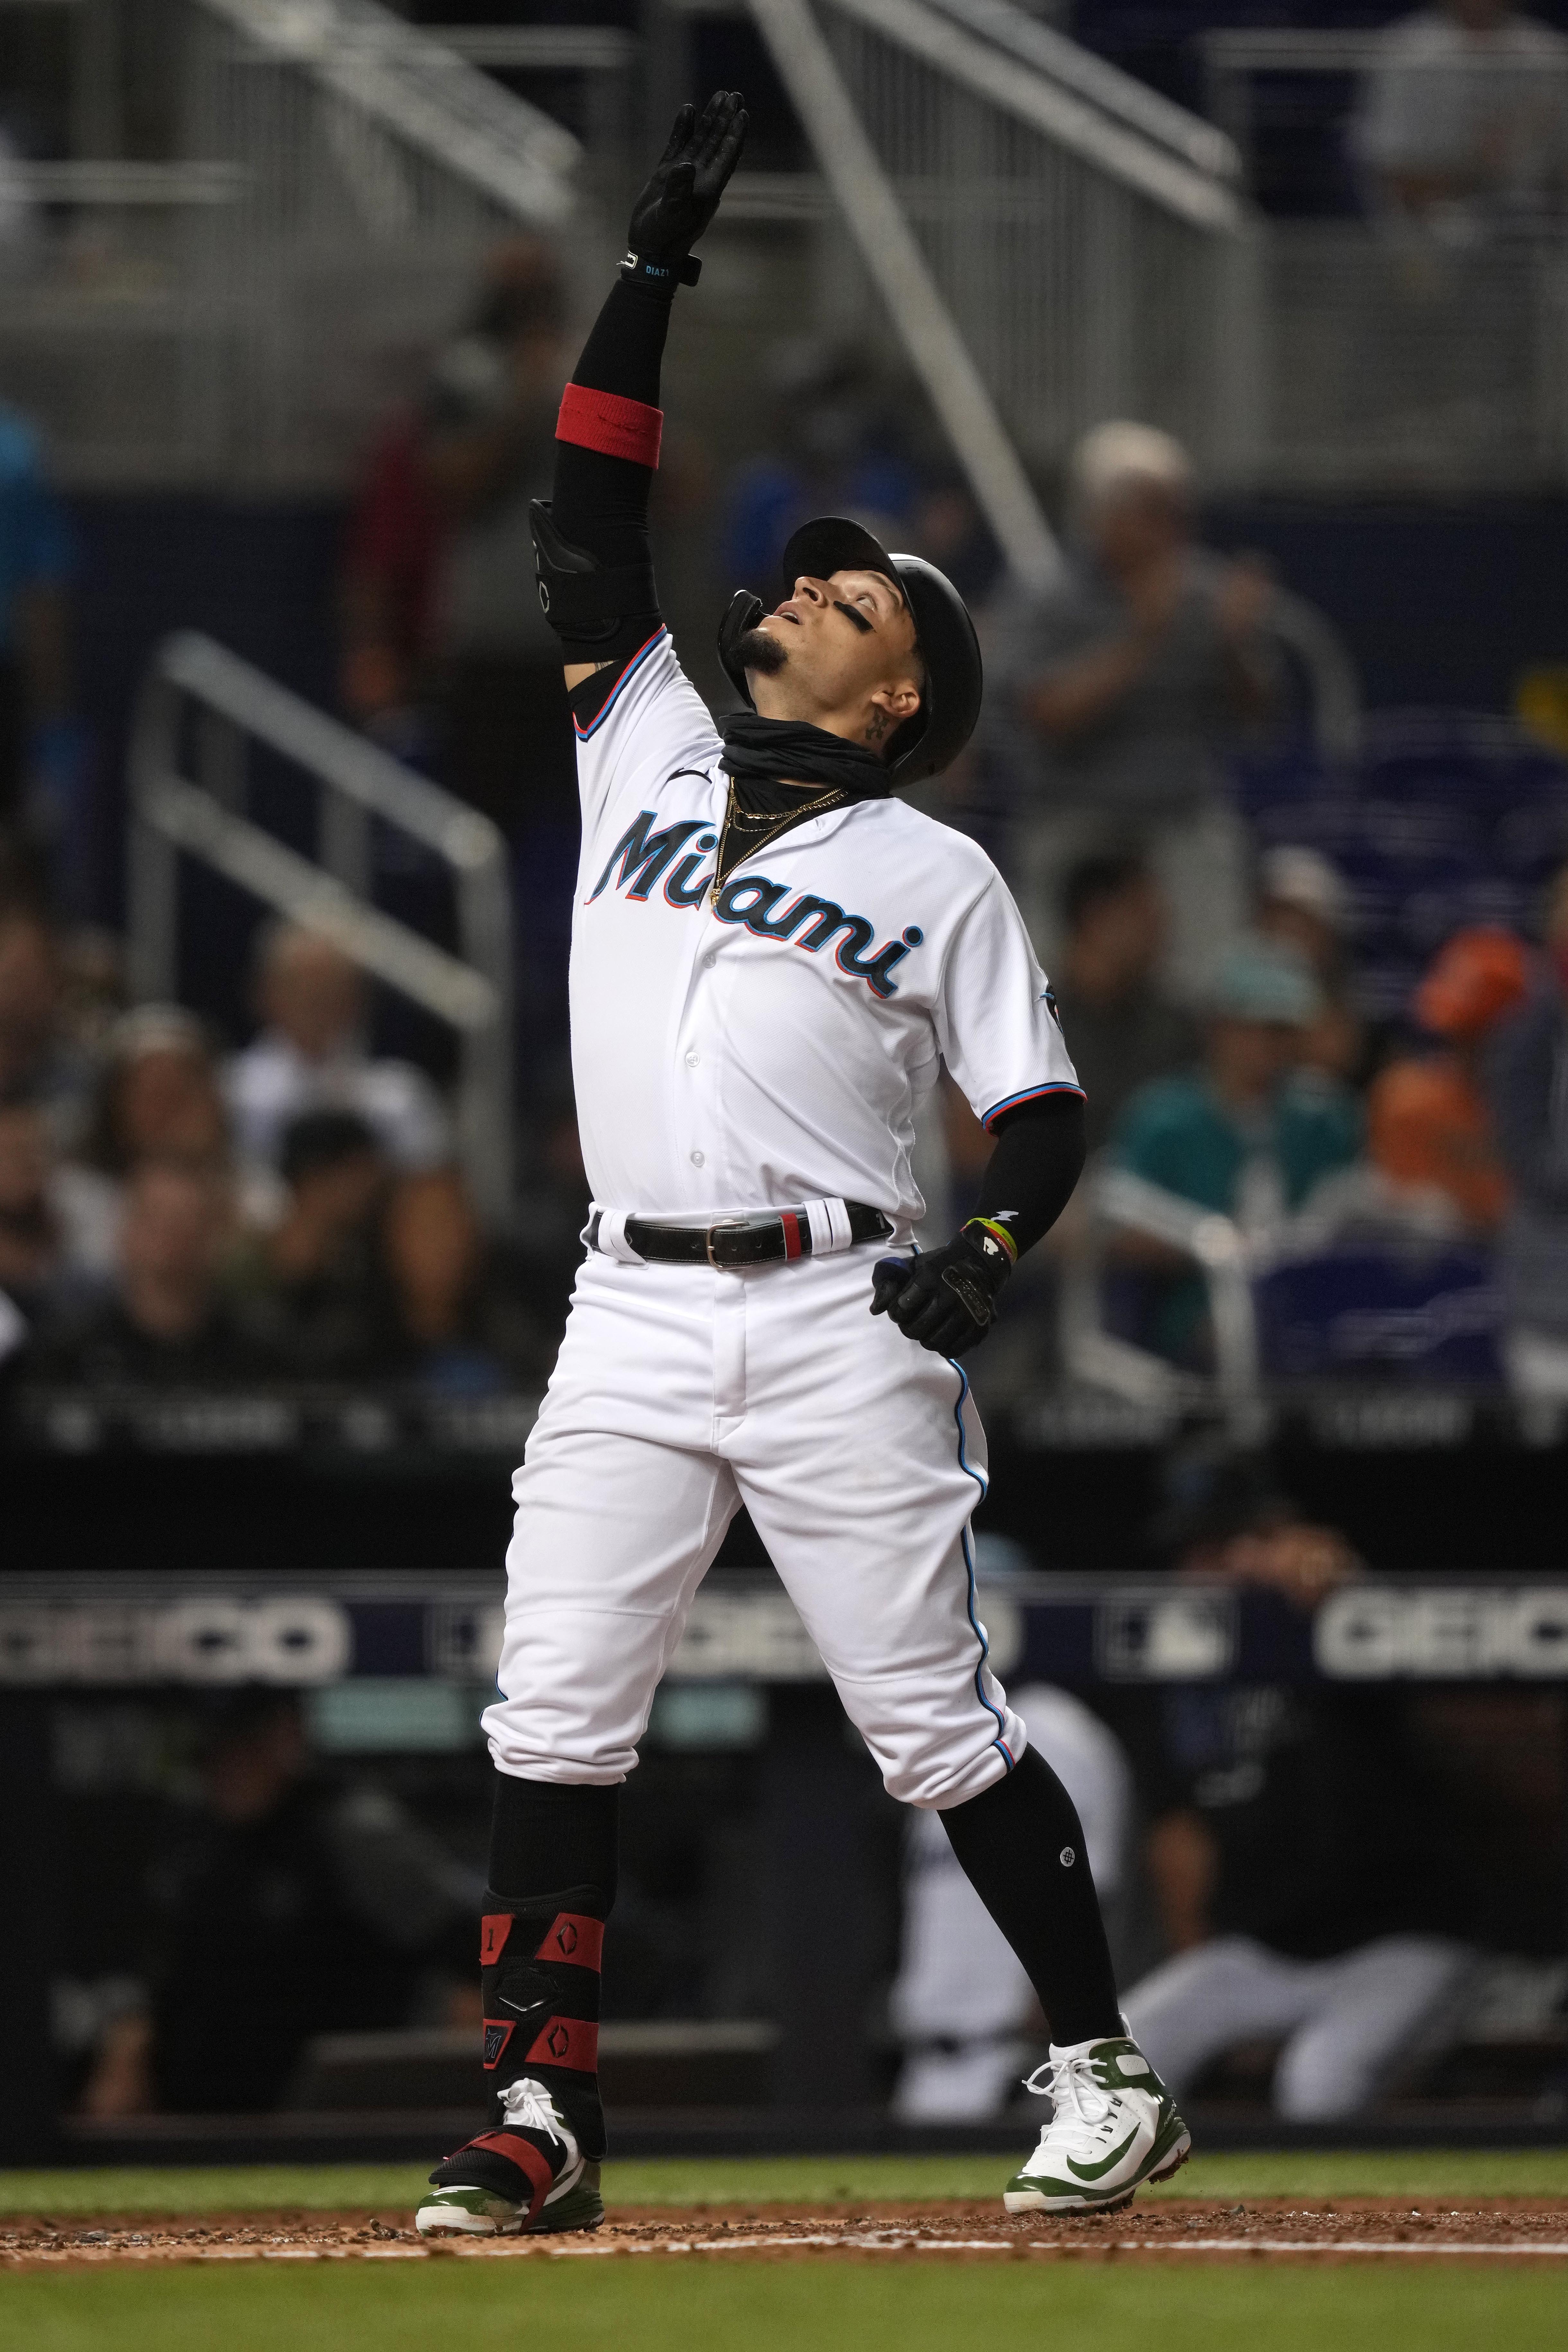 Miami Marlins second baseman Isan Diaz (1) celebrates at the plate after hitting a solo homerun in the 2nd inning against the Atlanta Braves at loanDepot park